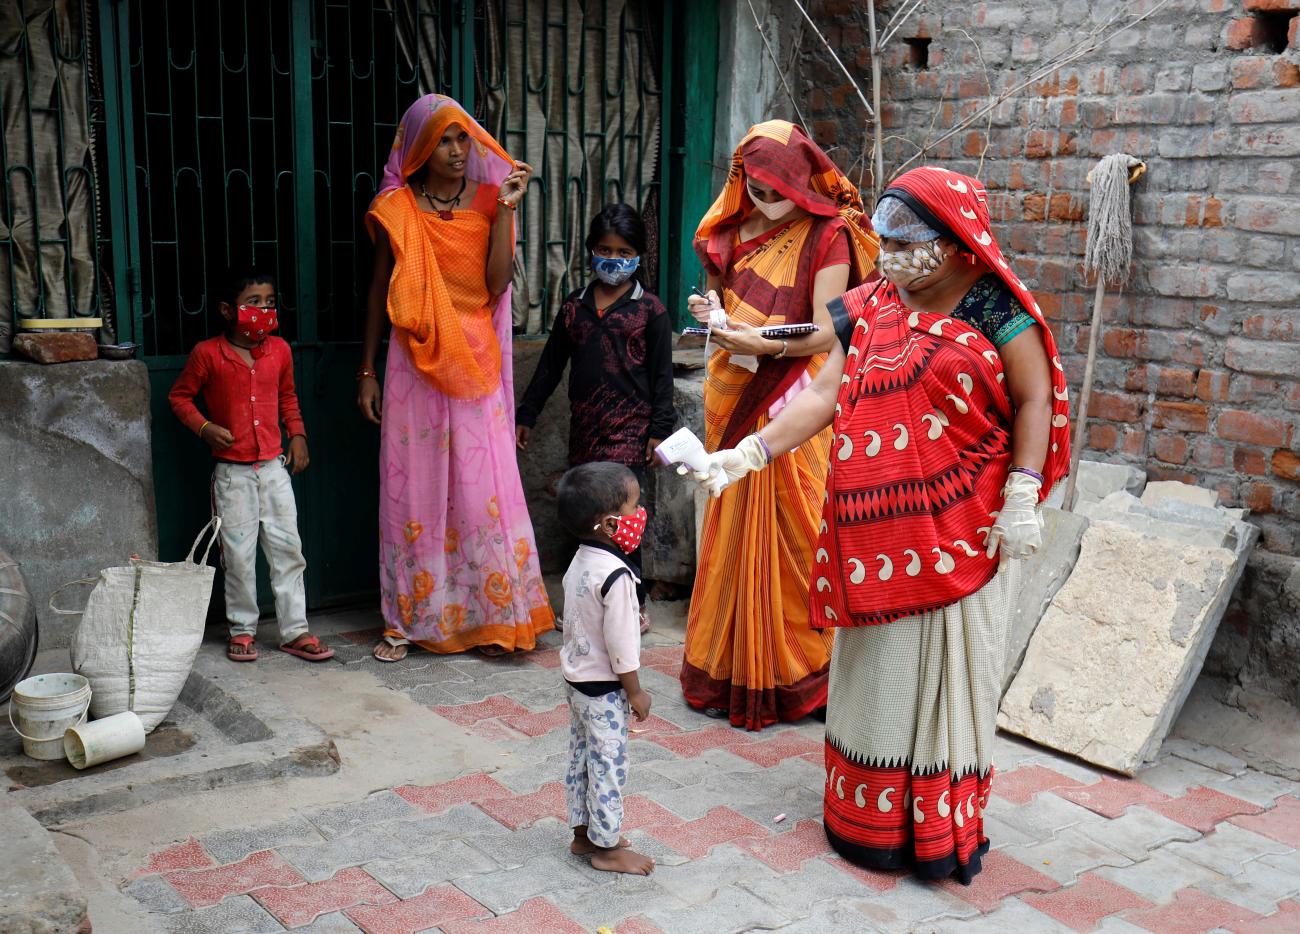 A healthcare worker checks the temperature of a child during a door-to-door surveillance to safeguard children amidst the spread of the coronavirus disease (COVID-19), at a village on the outskirts of Ahmedabad, India, June 9, 2021.